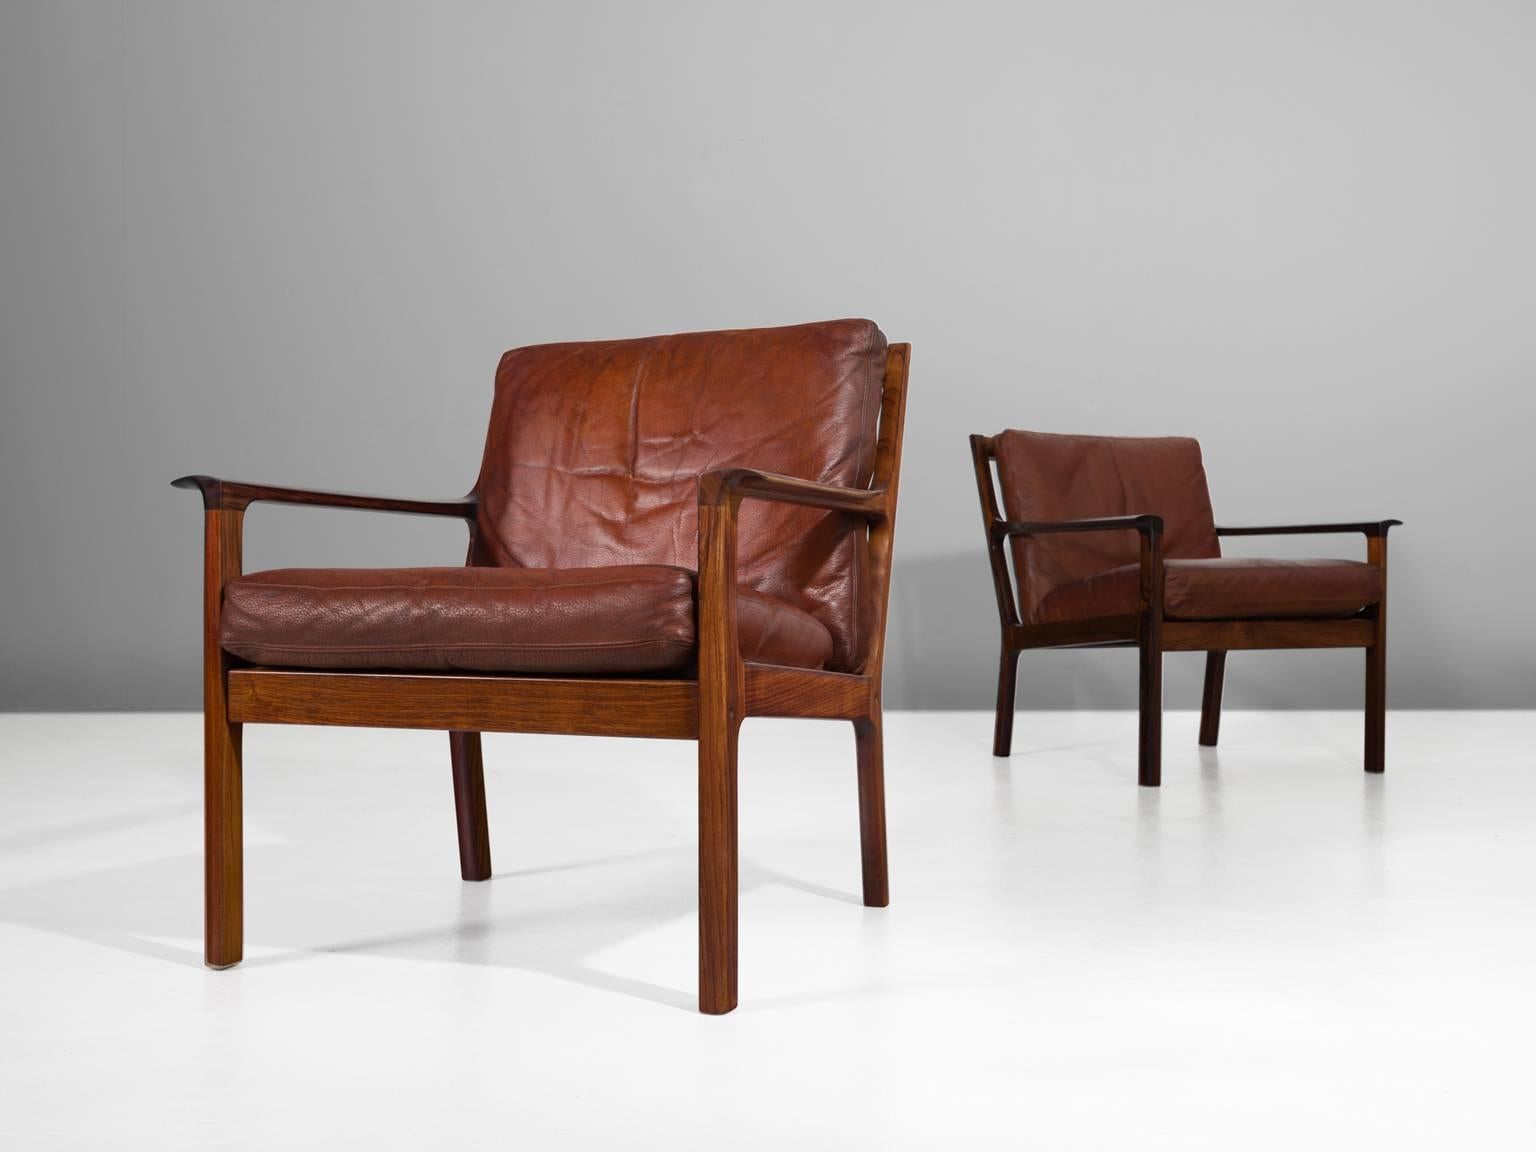 Set of two armchairs, in rosewood and leather, Denmark, 1950s.

A pair of lounge chairs in solid rosewood. These easy chairs have a simplistic design with a very open character. All attention goes to the beautiful and high-quality materials. The